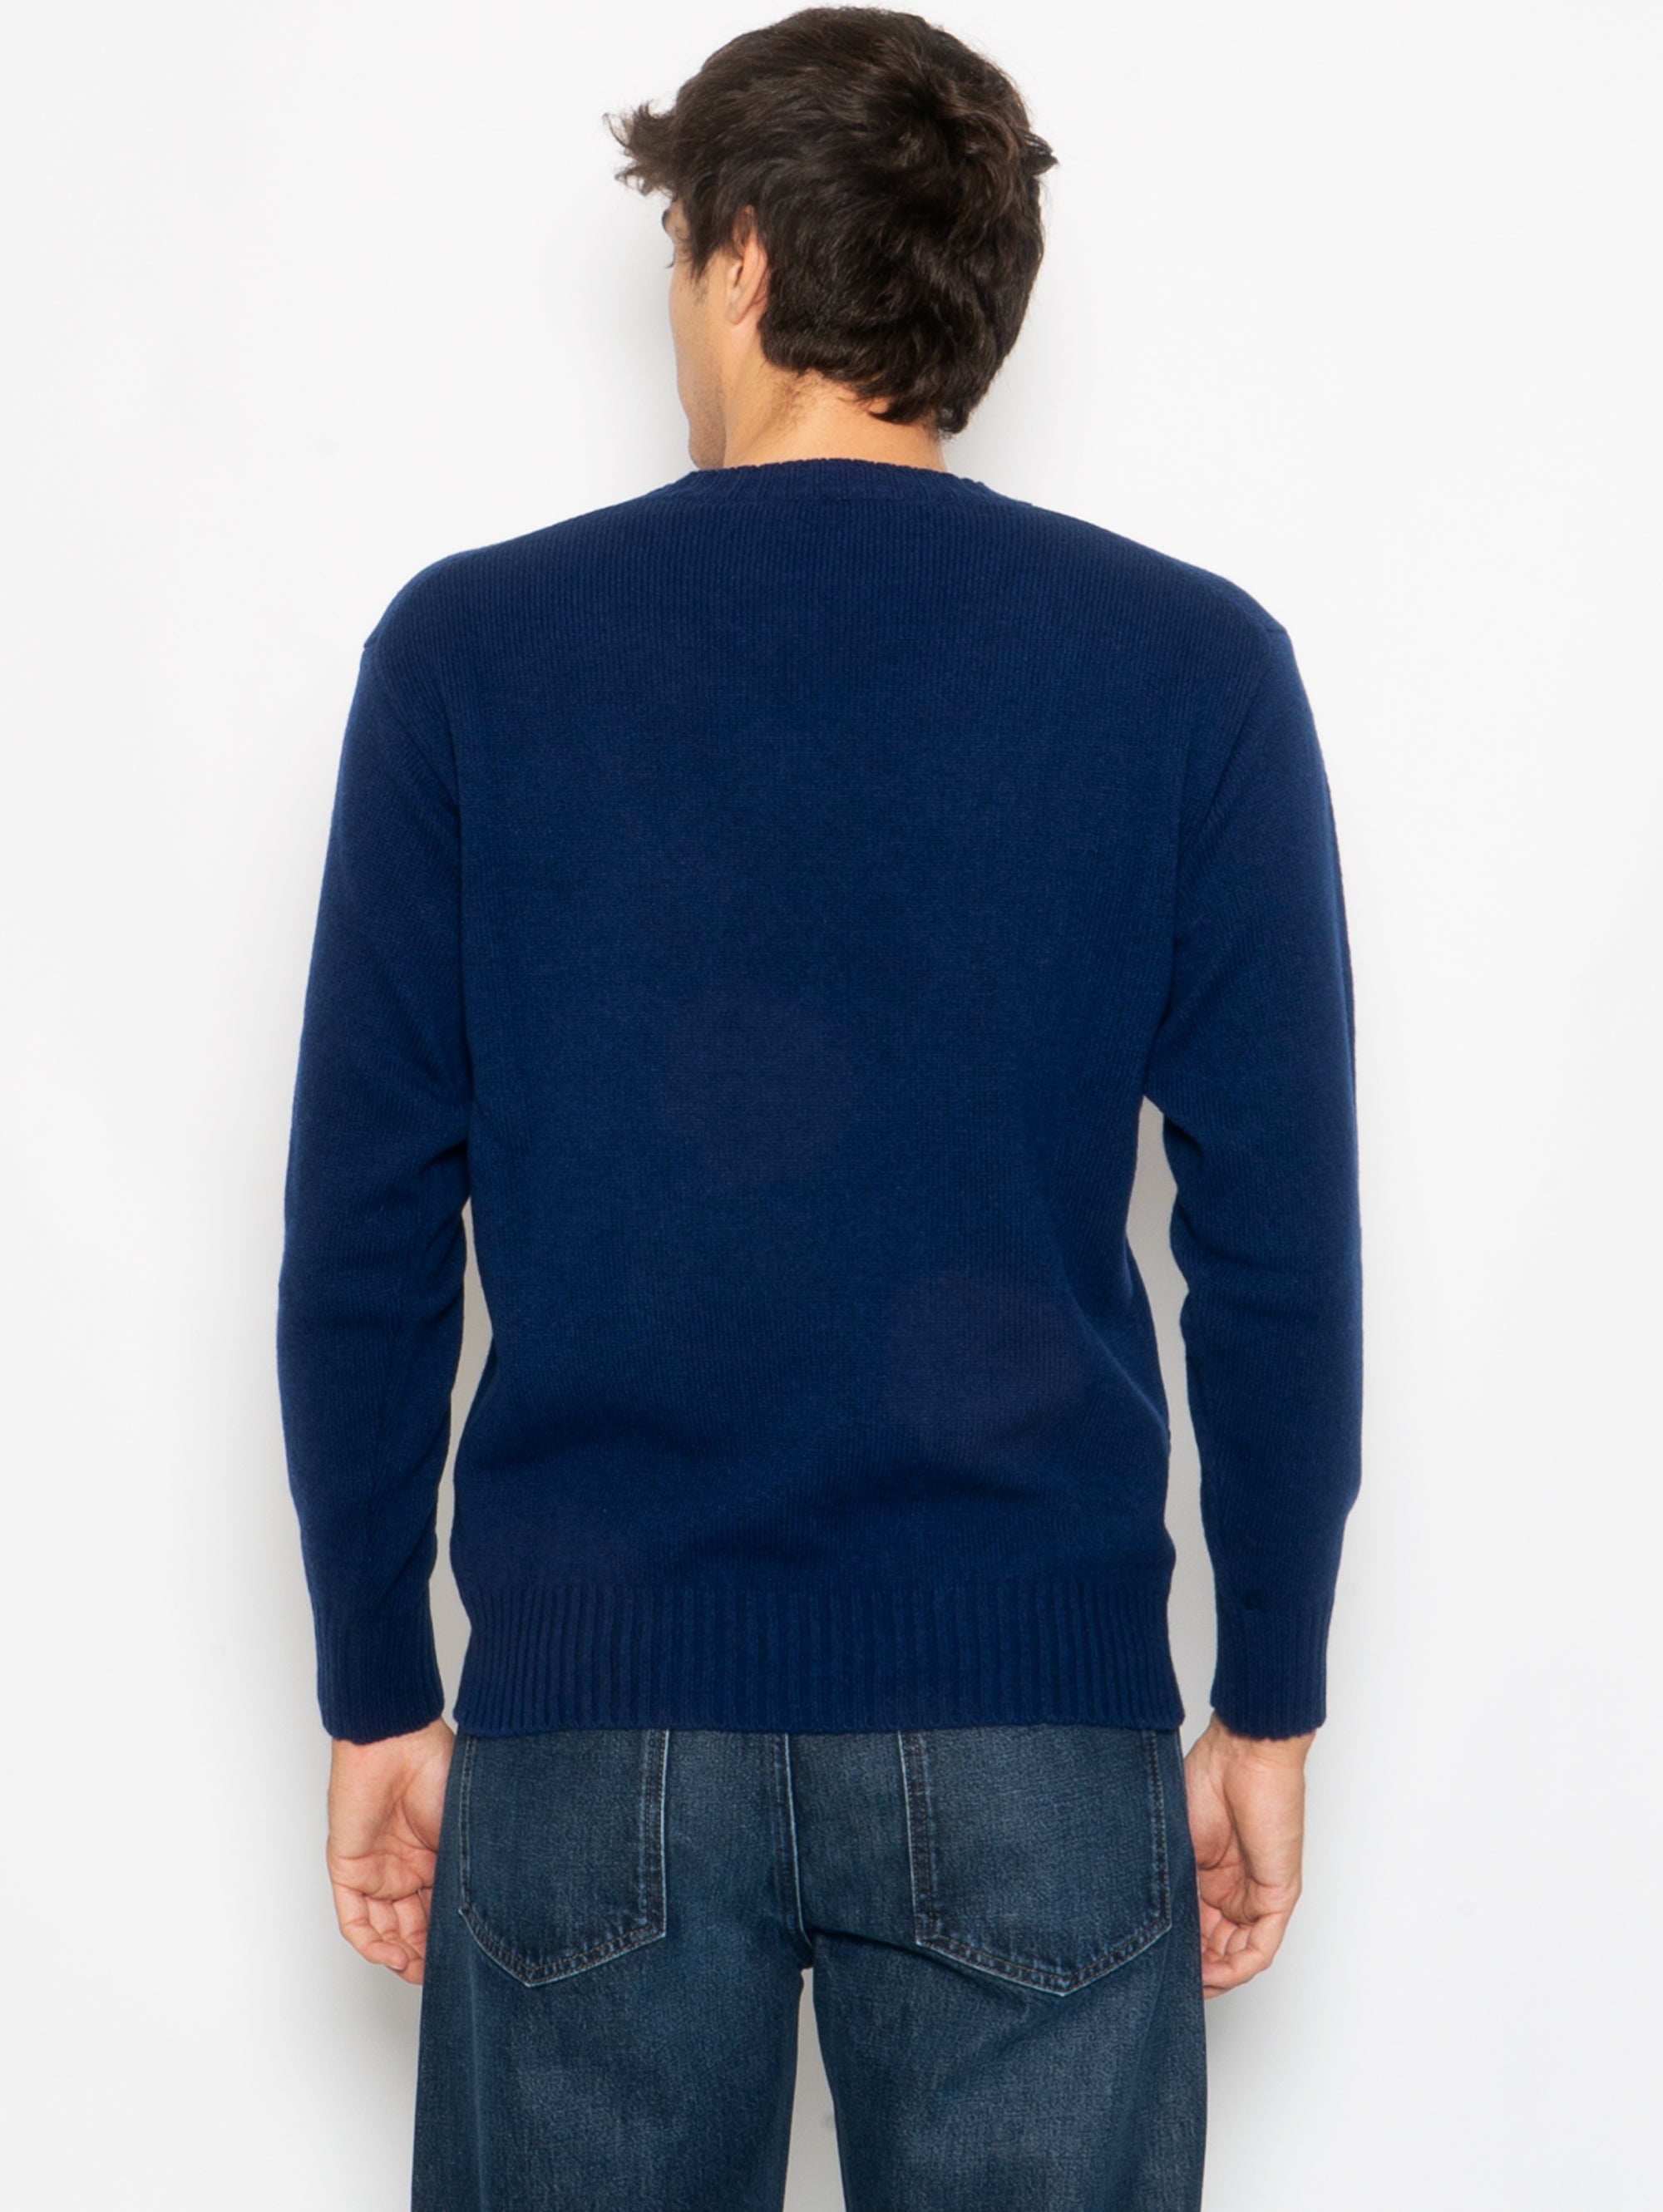 Blue Wool and Cashmere Crewneck Sweater